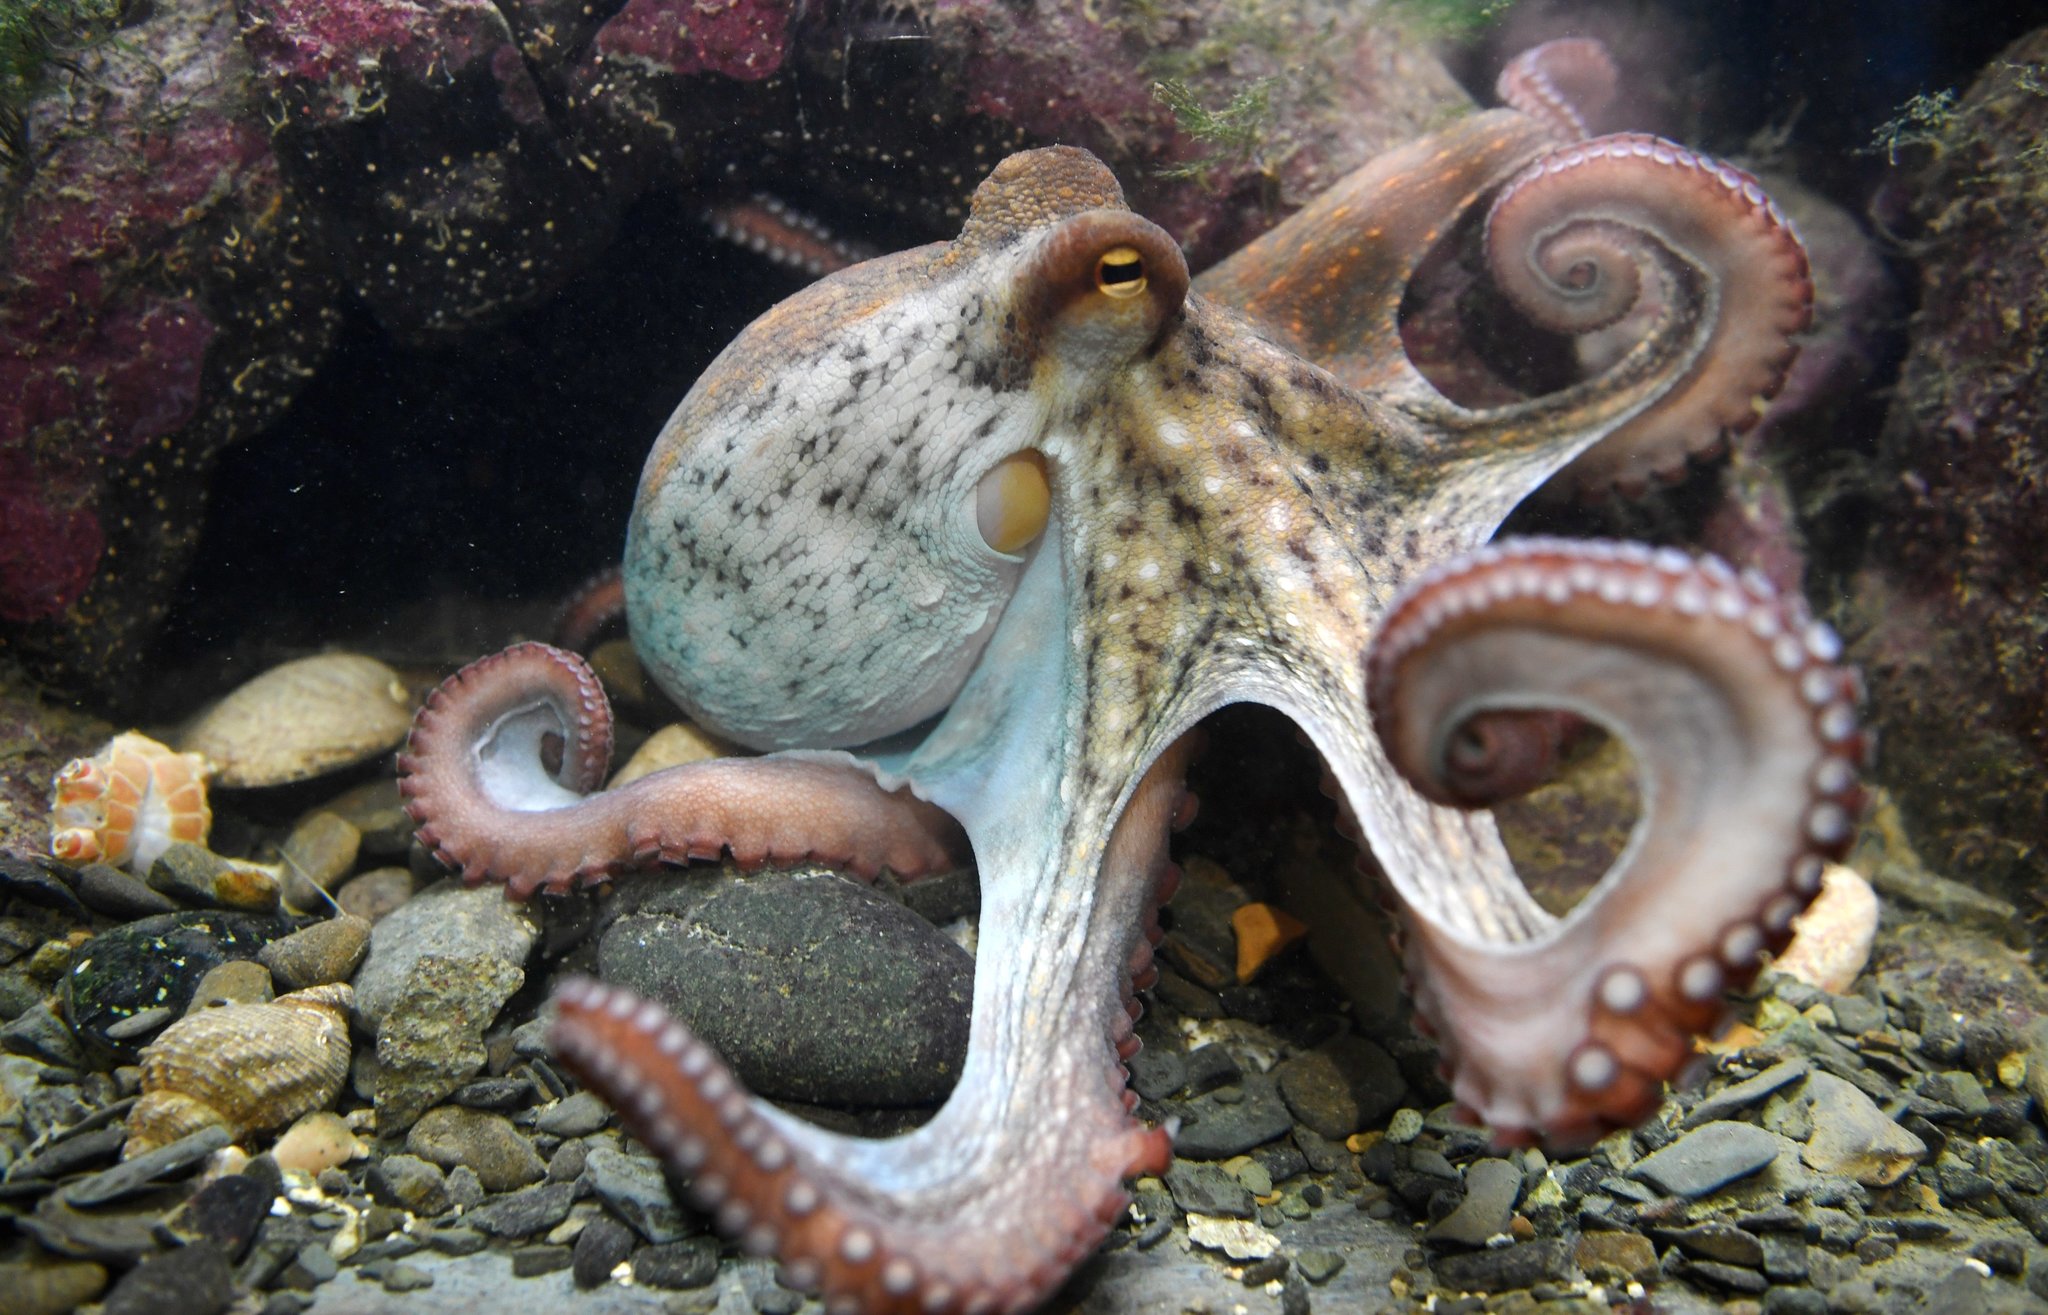 How intelligent is an octopus?